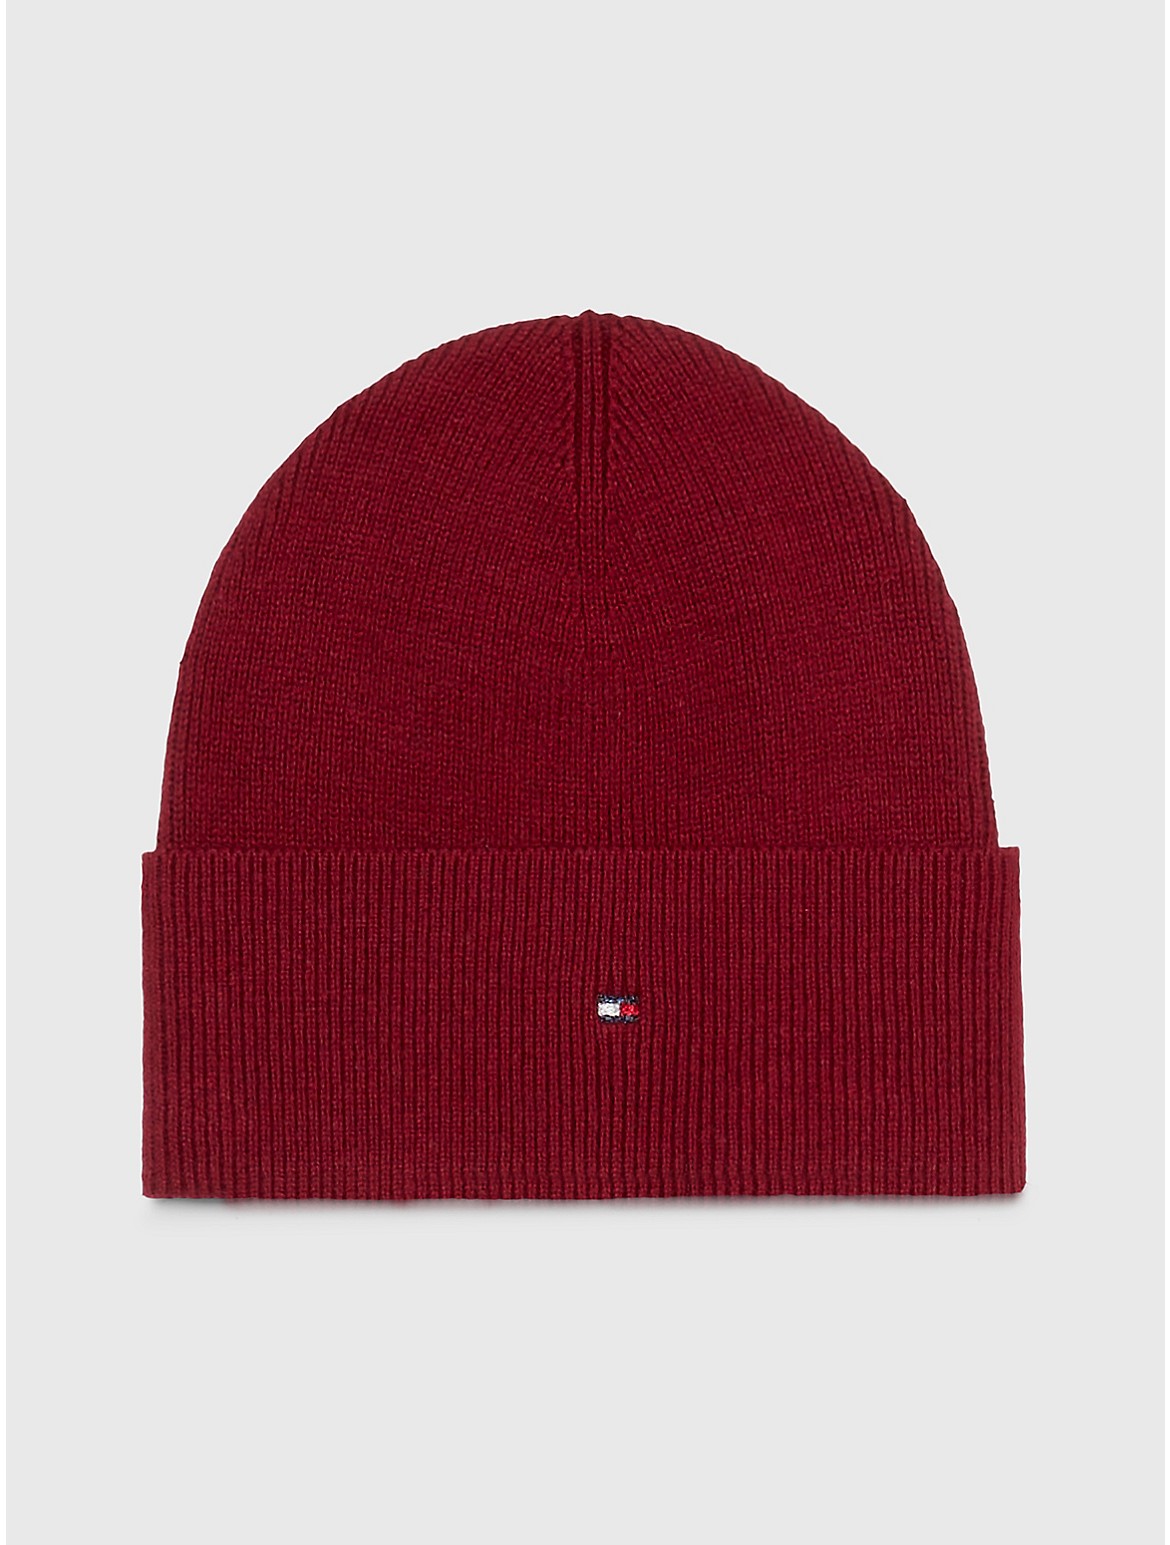 Tommy Hilfiger Women's Flag Logo Cotton and Cashmere Beanie - Red